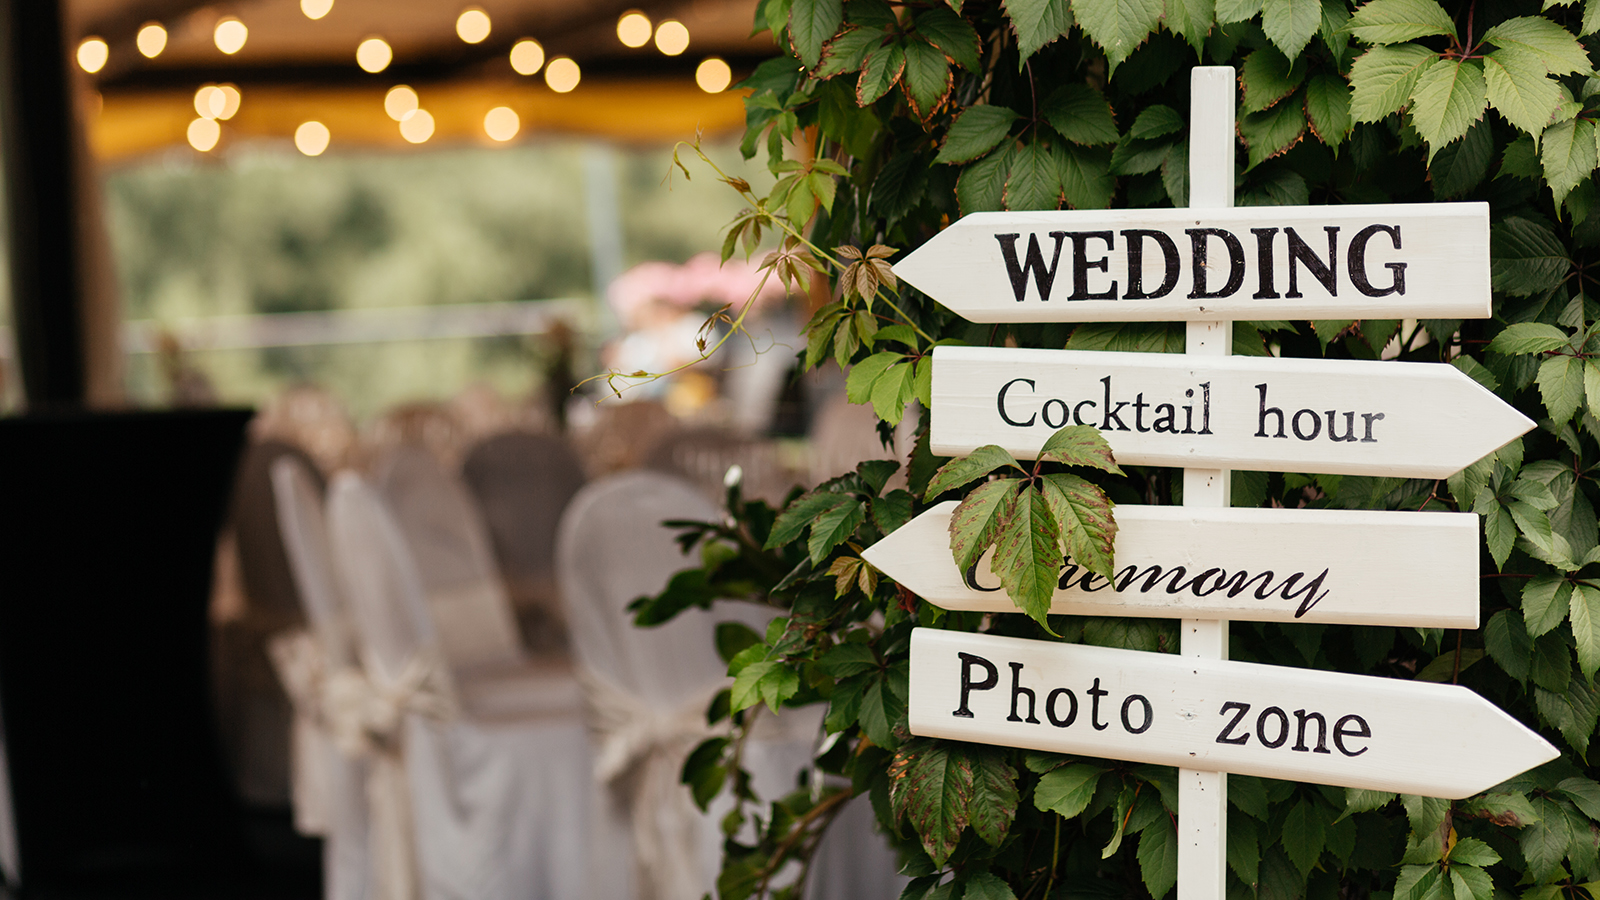 Sign for guests to help them to find the place of wedding, photo zone, cocktails, ceremony made from wood